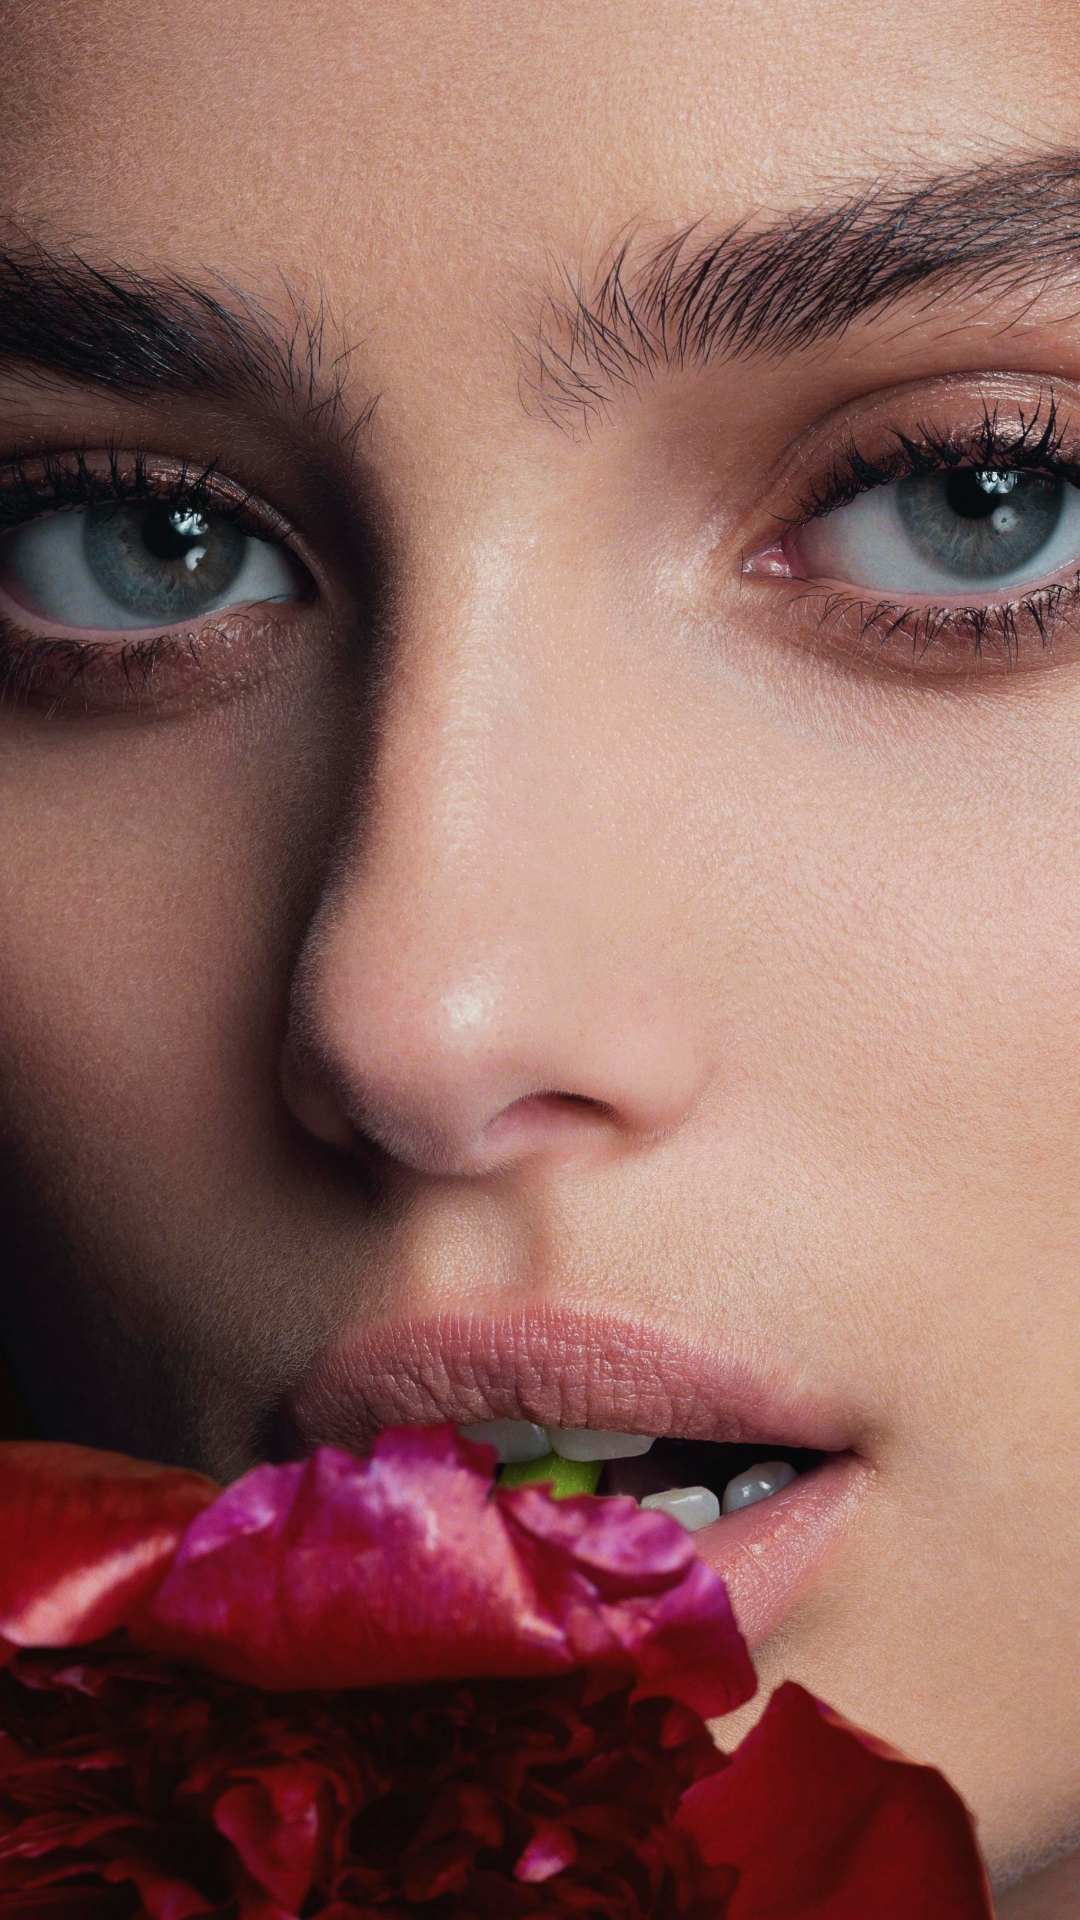 women, taylor marie hill, face, american, model, stare, blue eyes